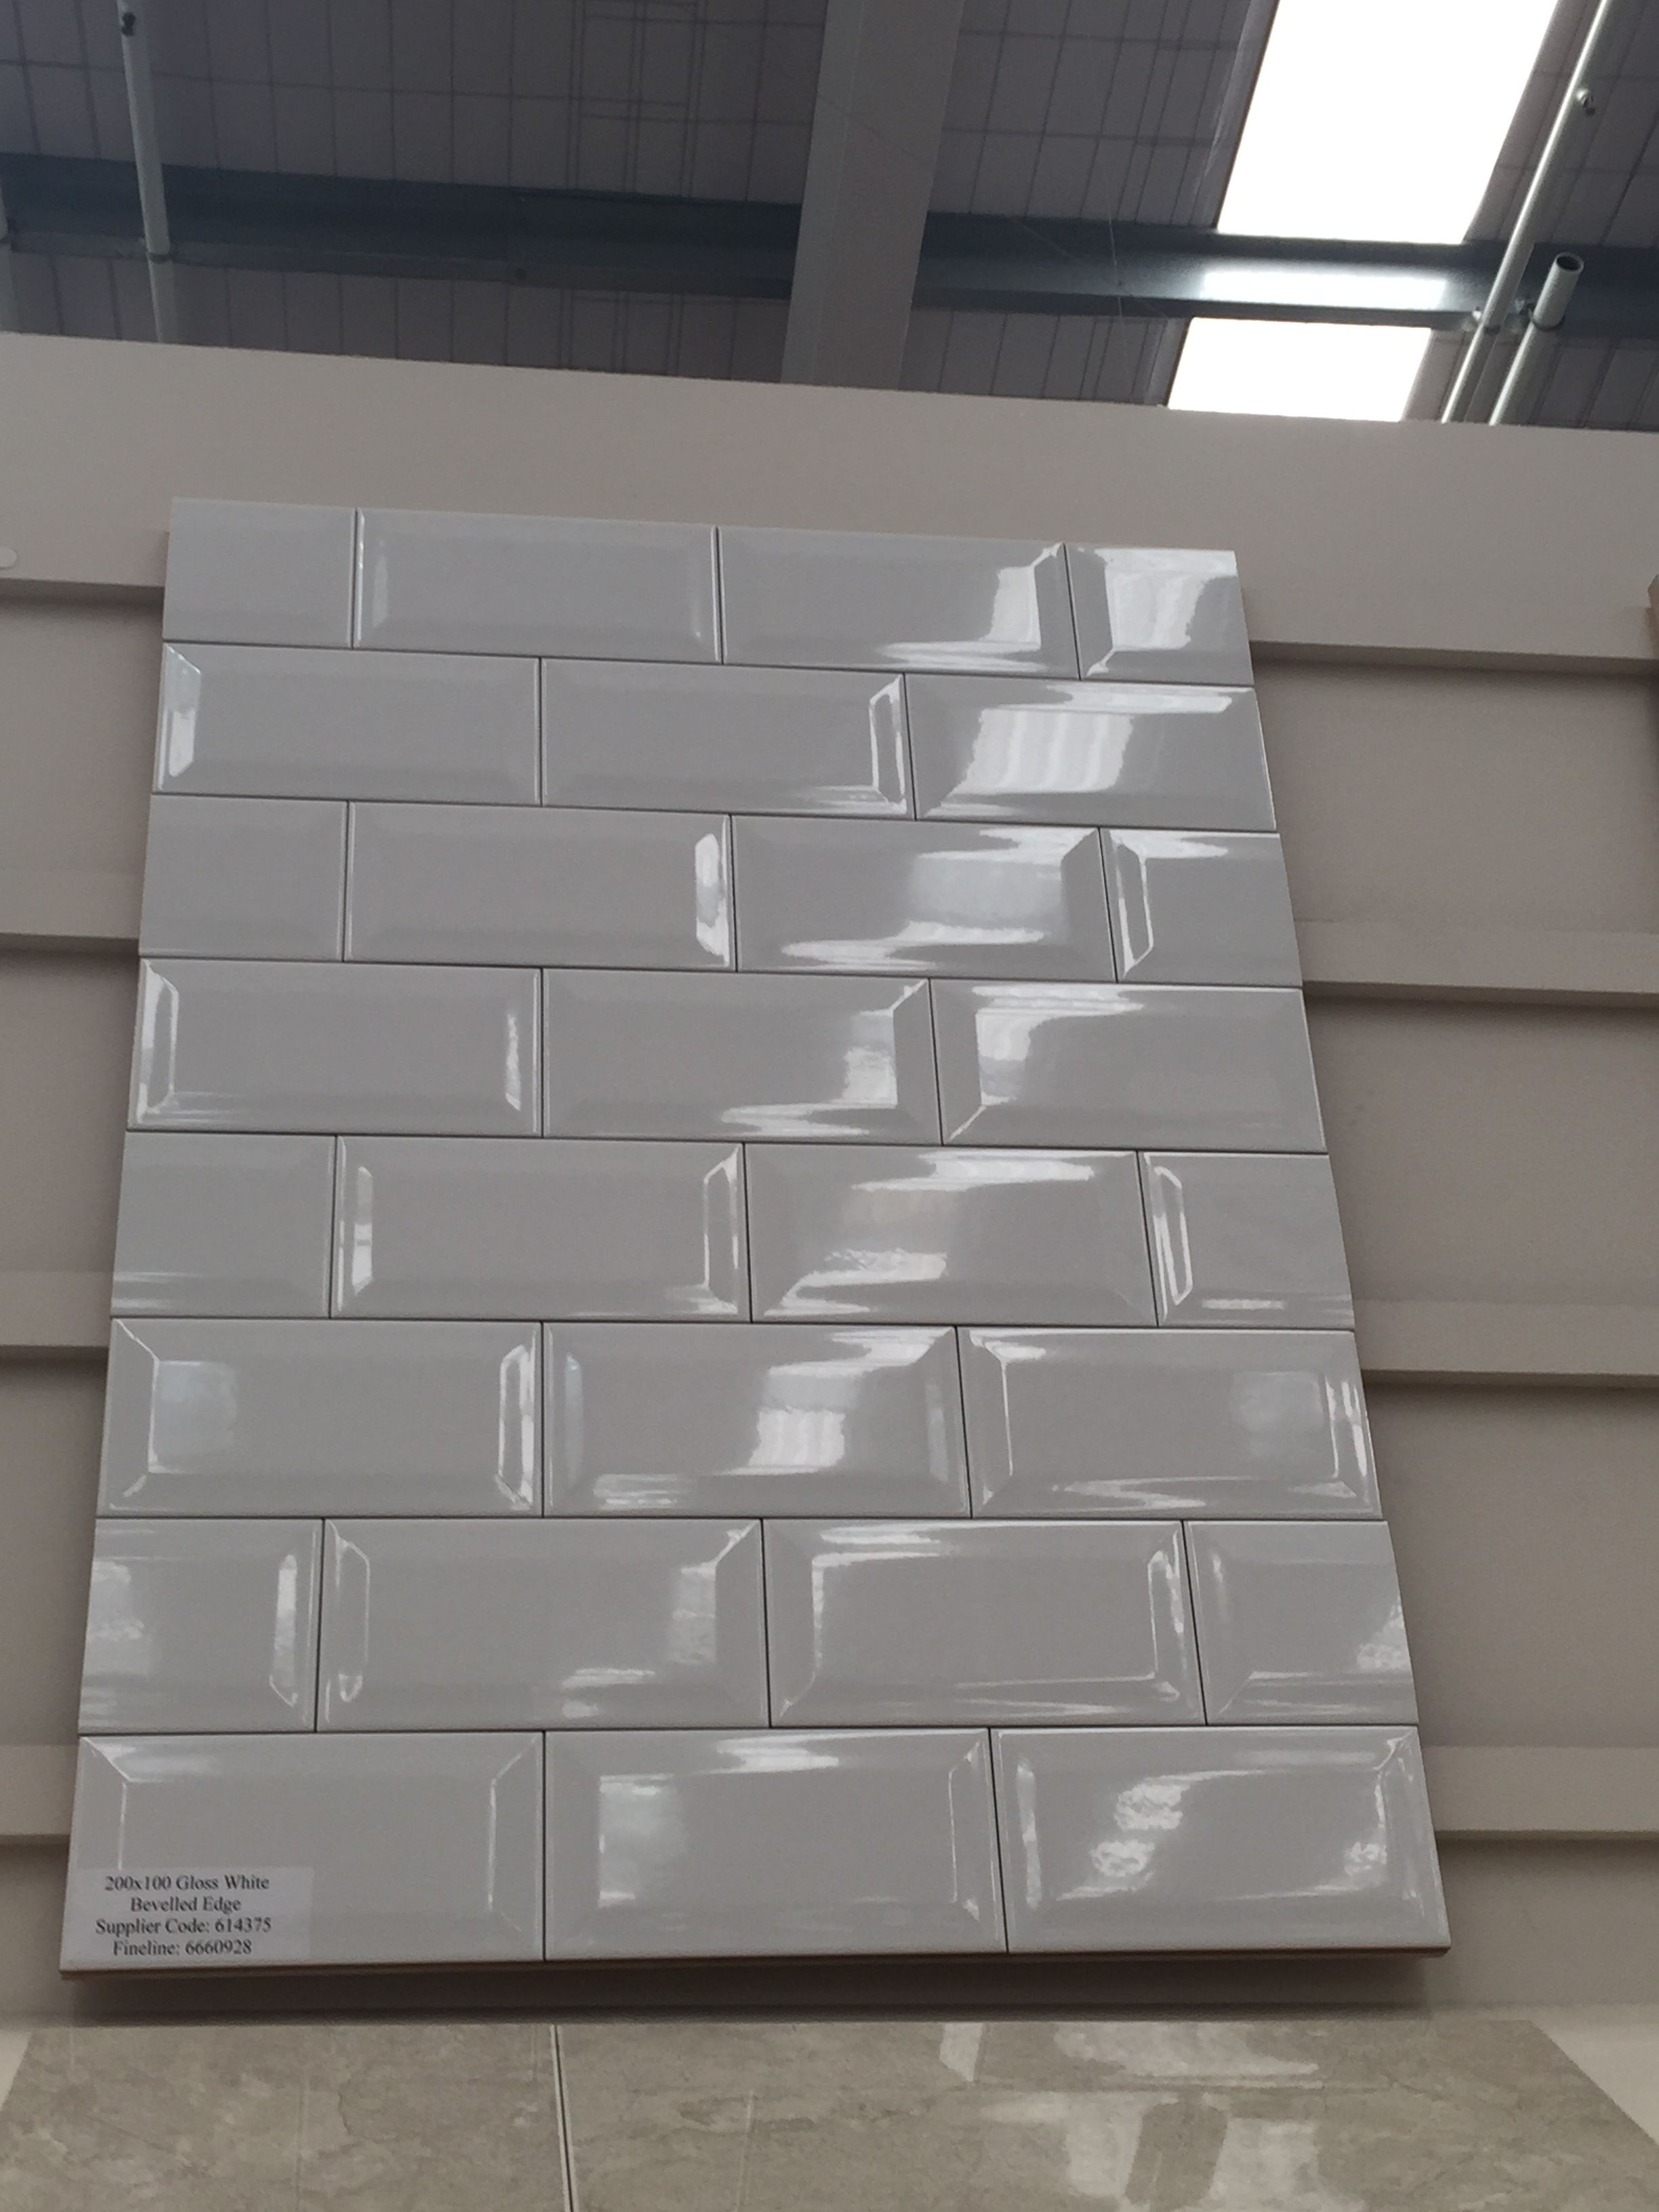 Beveled Subway Tiles Bunnings In 2019 Kitchen Reno within dimensions 2448 X 3264